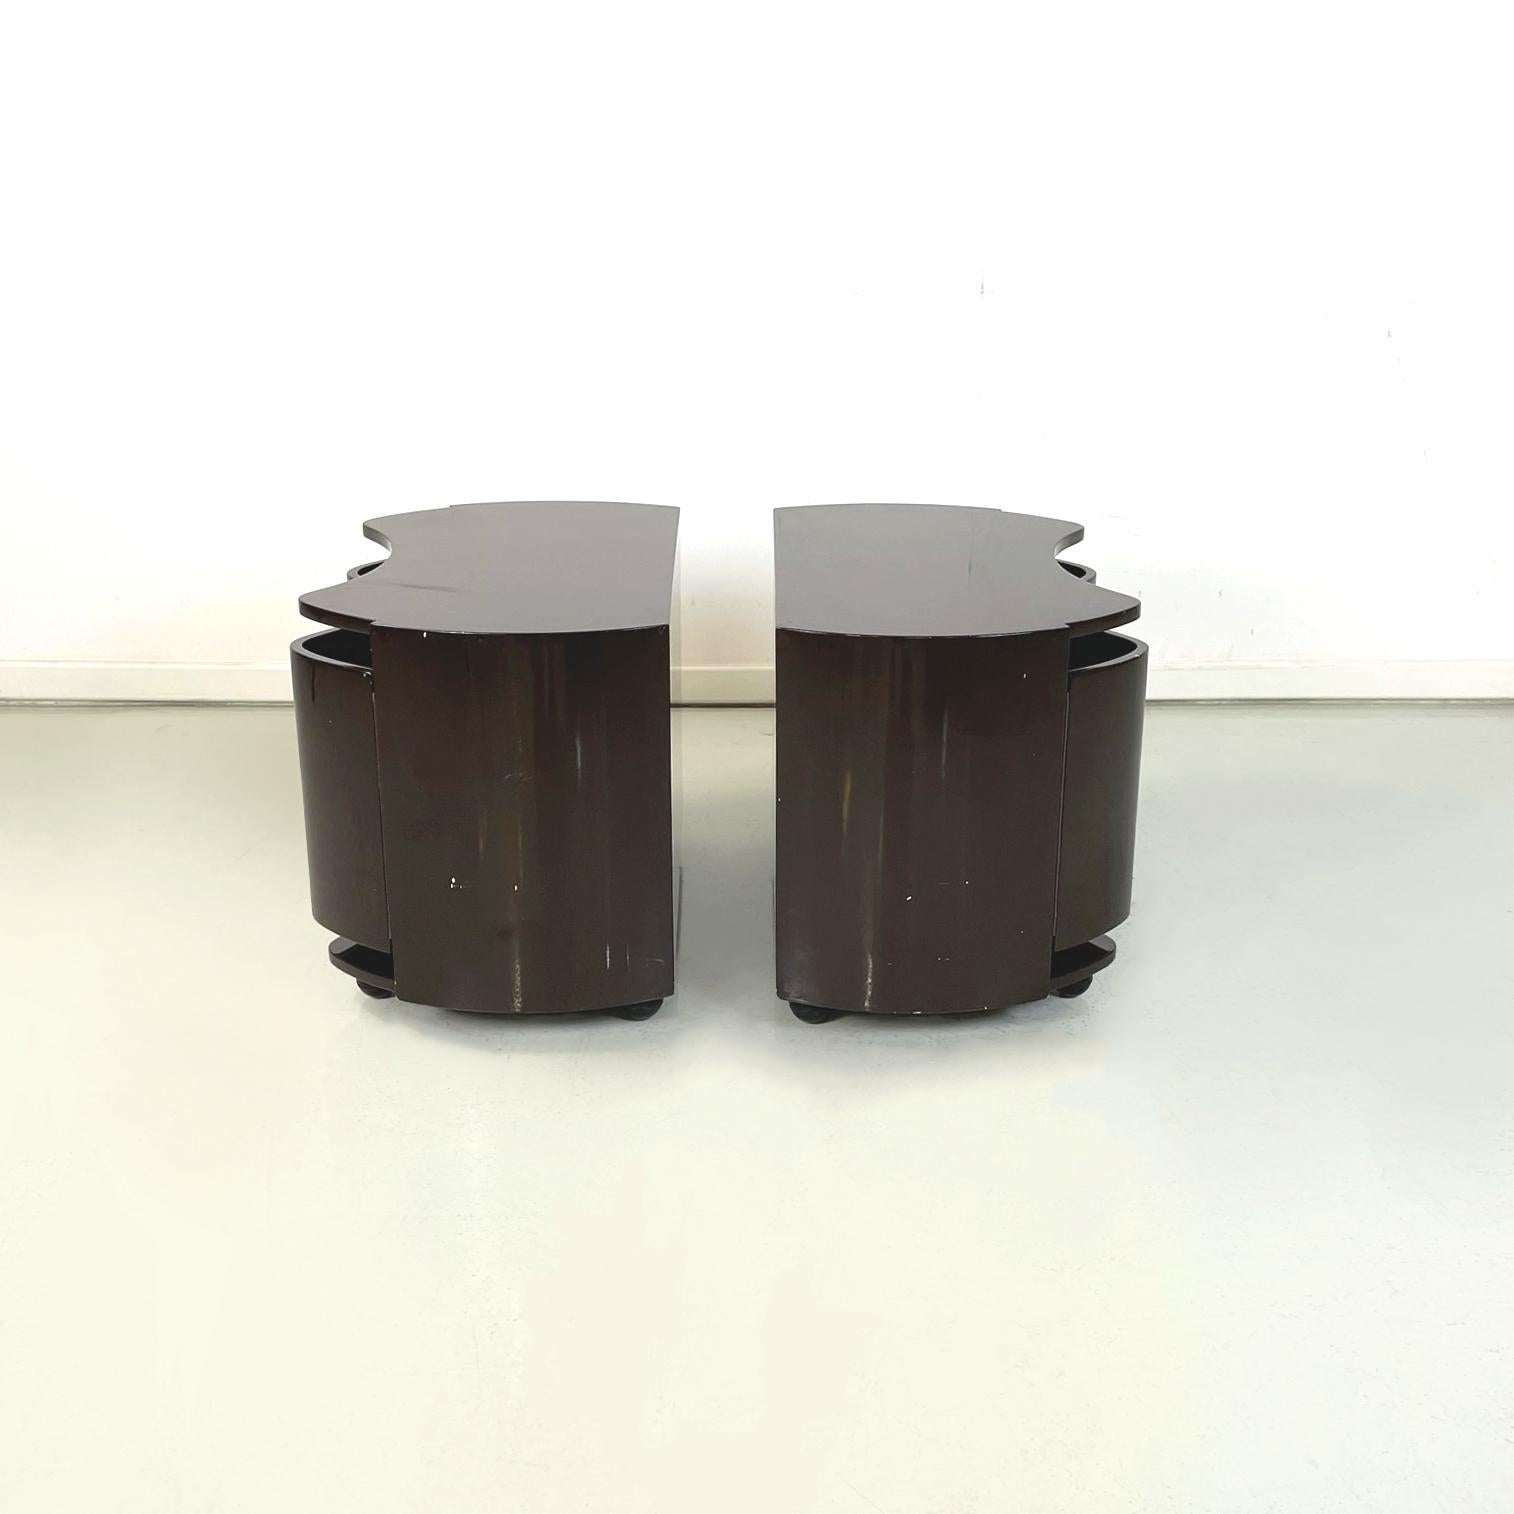 Modern Italian modern Dark brown lacquered wood bed side table Aiace by Benatti, 1970s For Sale